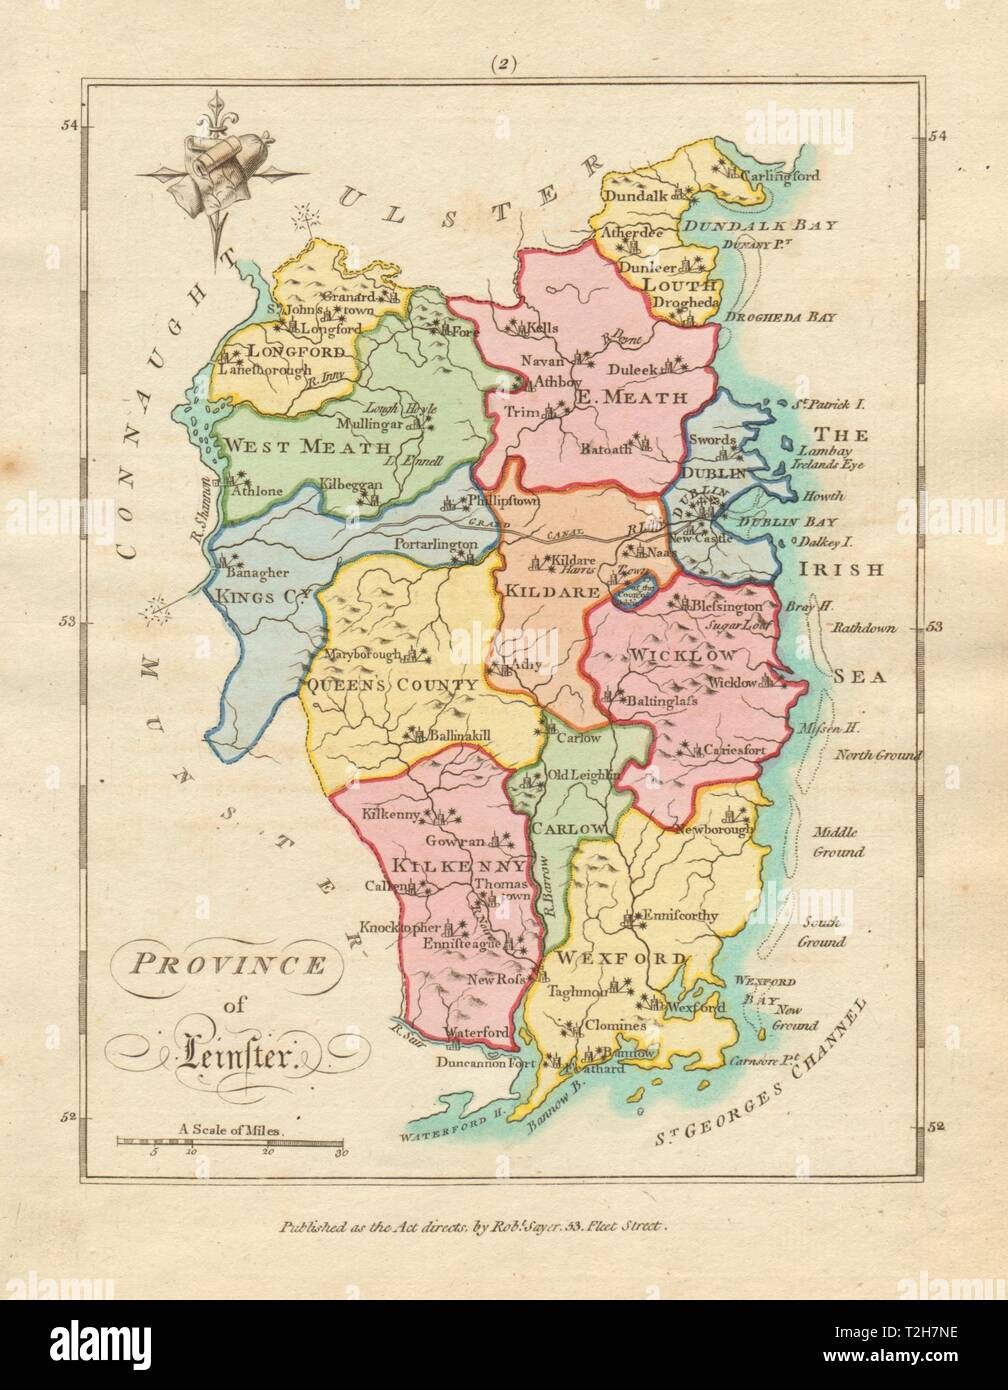 Province of Leinster. Antique copperplate map by Scalé / Sayer 1788 old Stock Photo